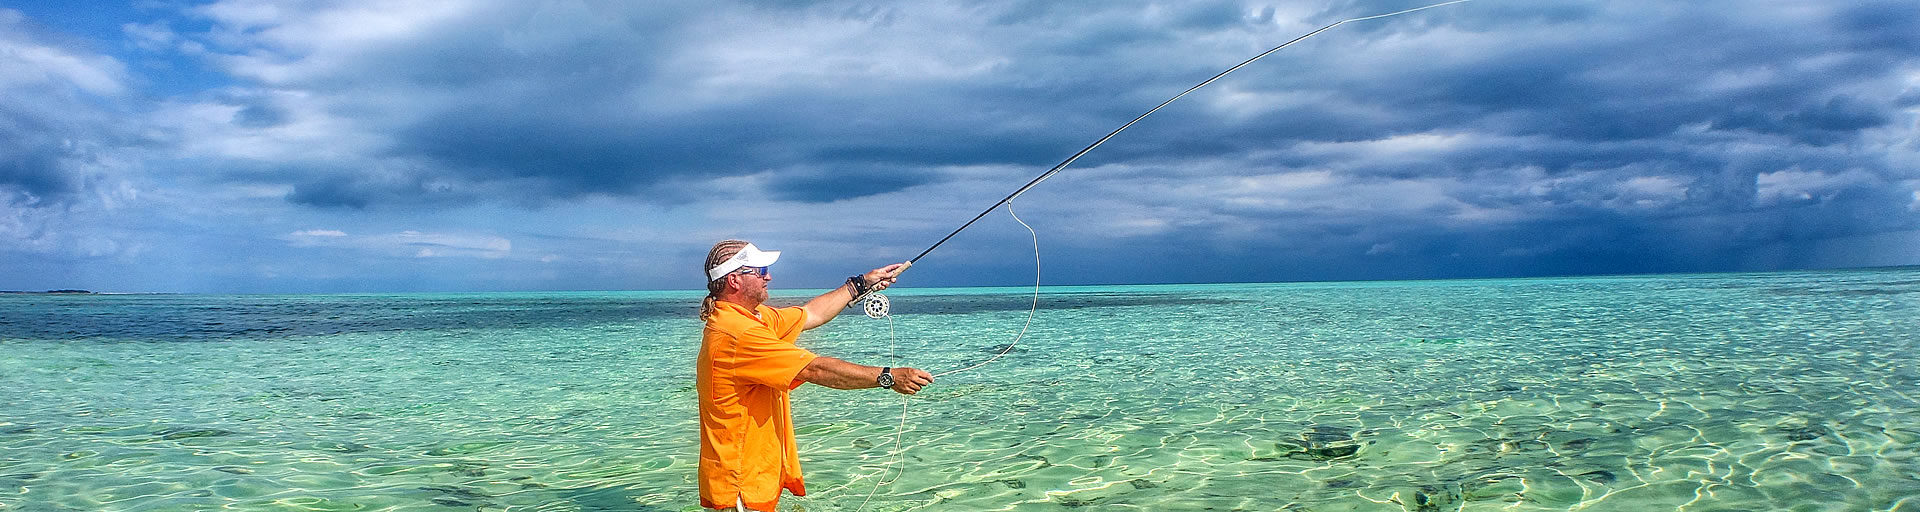 A Basic Guide to Saltwater Fly Fishing in Belize- Fly Lines and Leaders